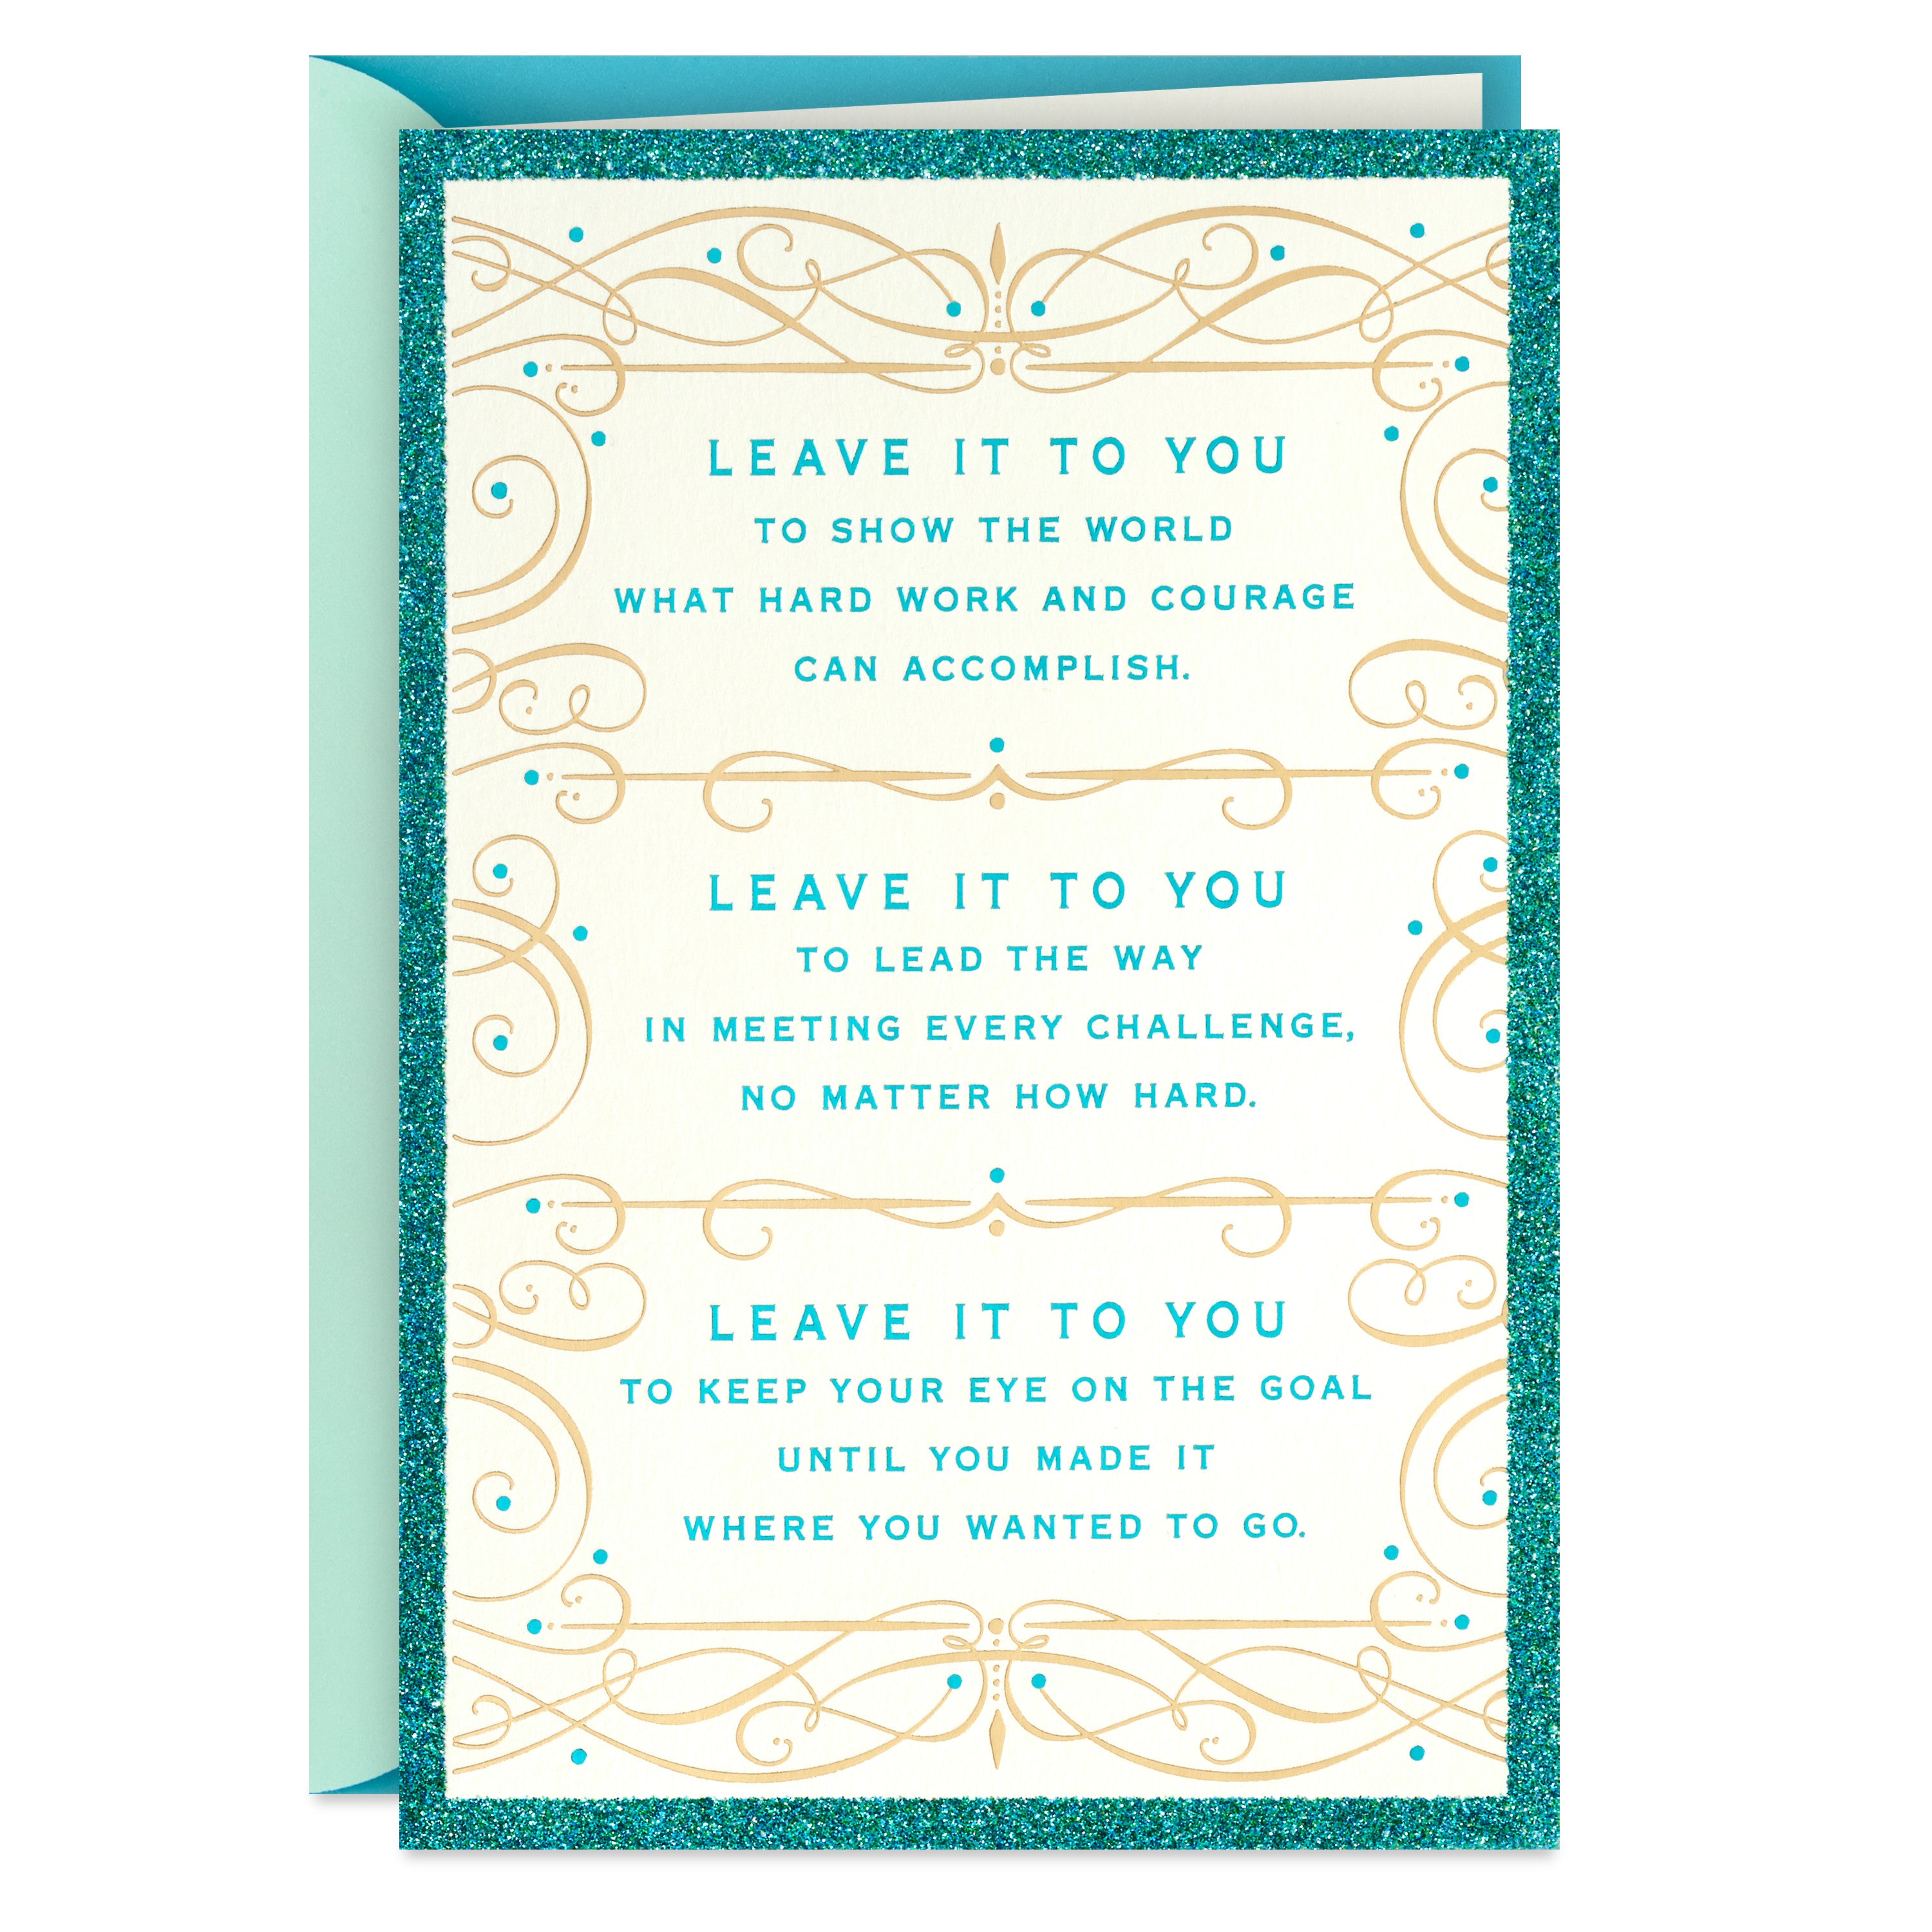 Graduation Card (Leave It To You)